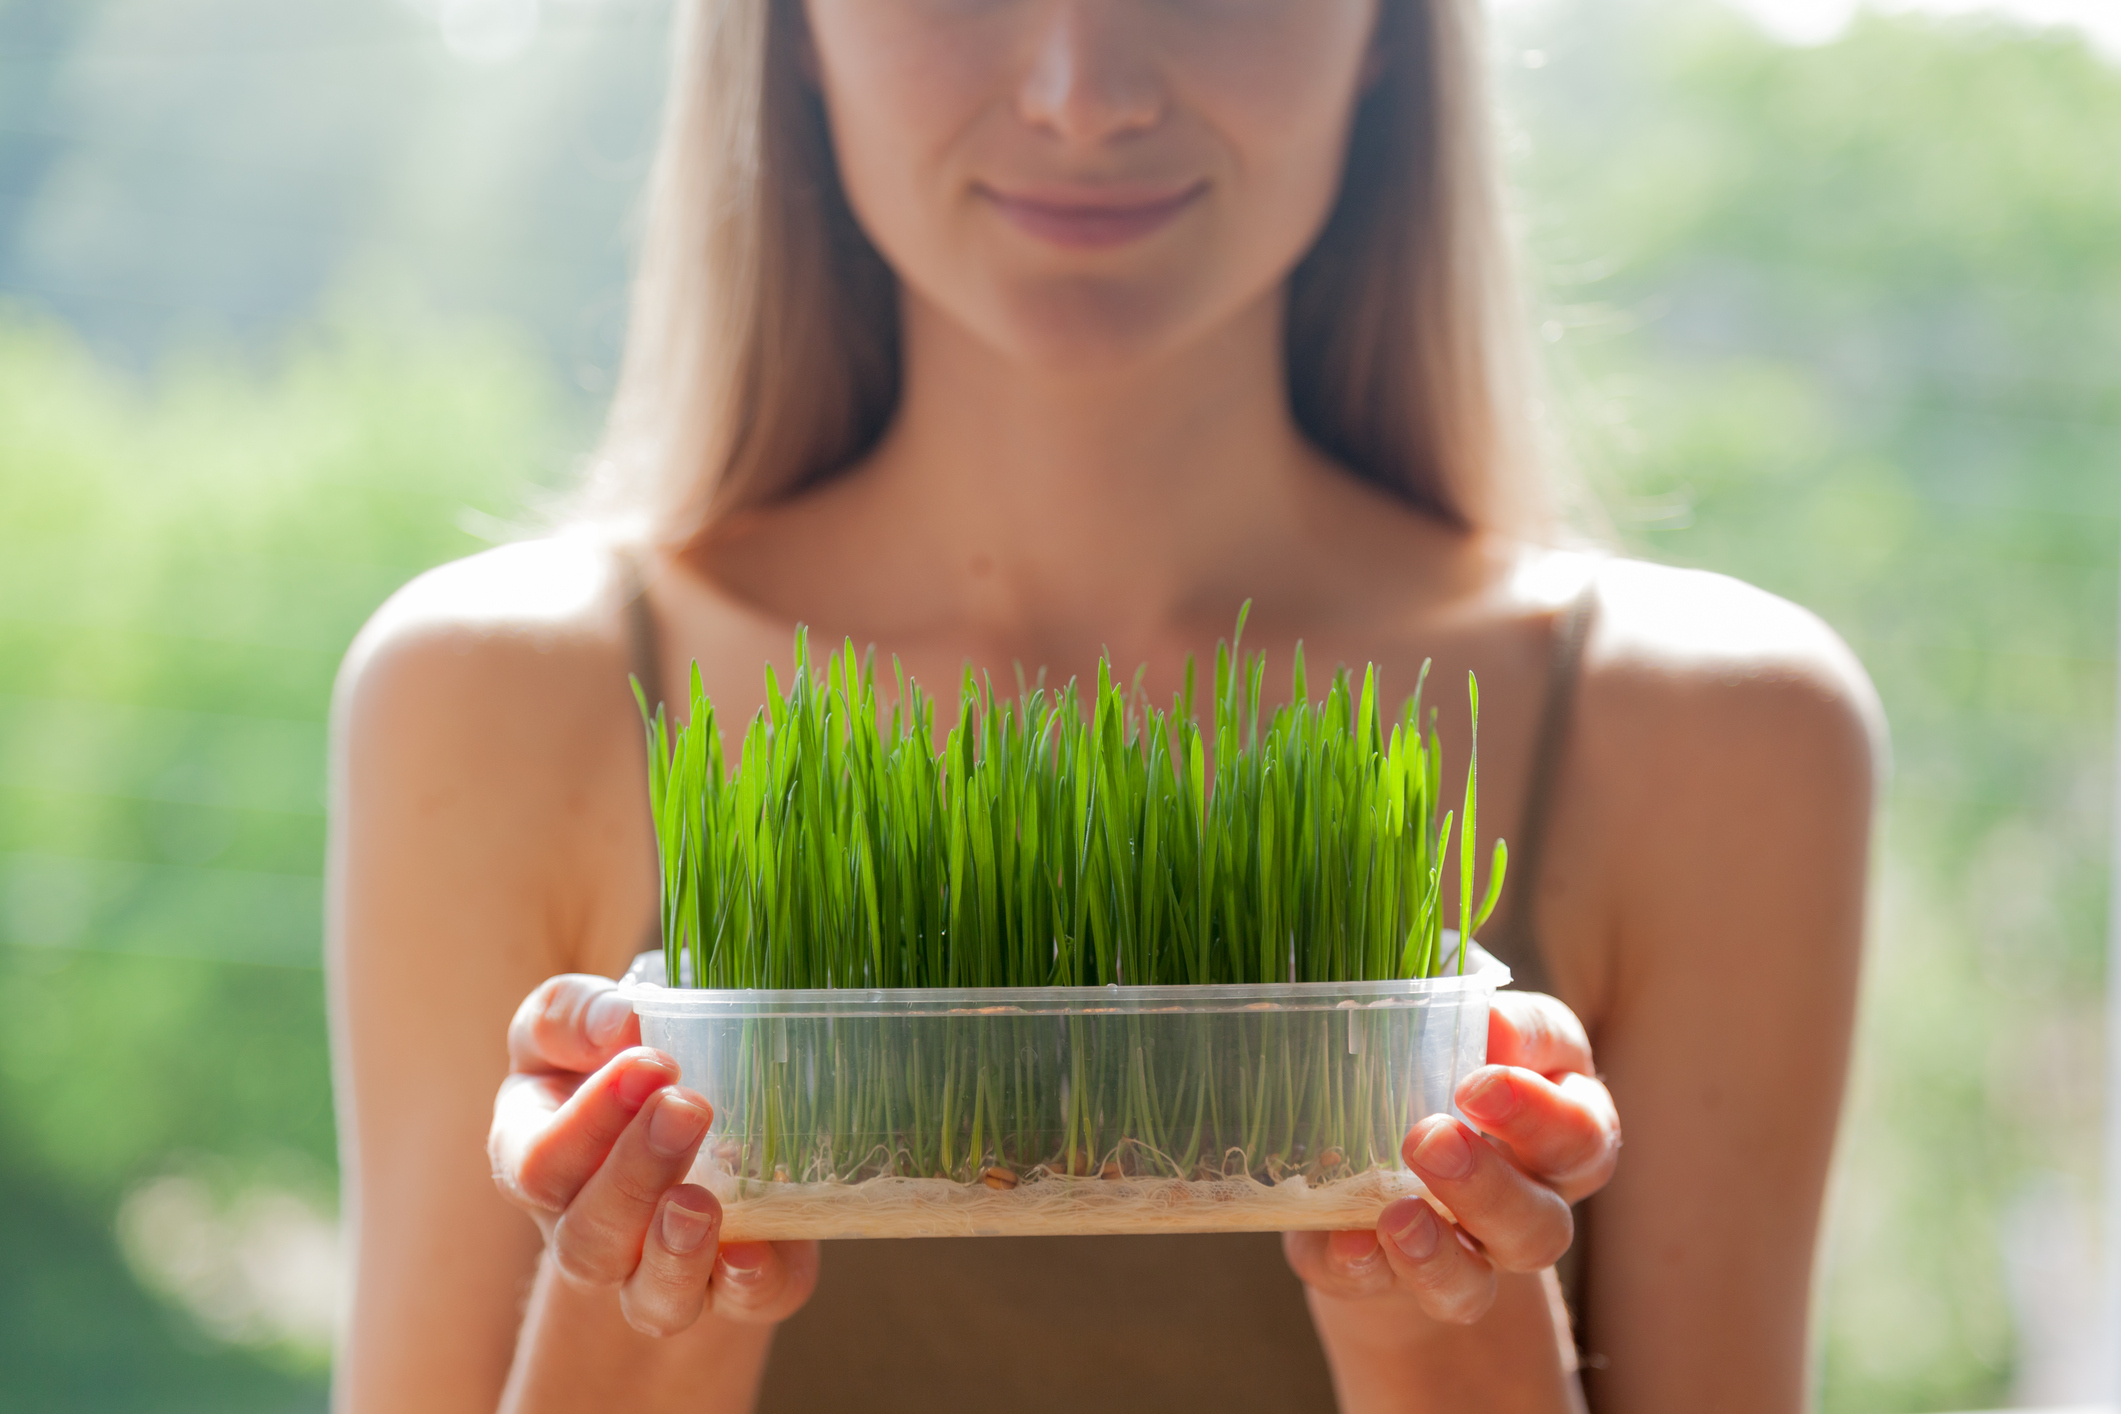 "Young woman grows raw wheatgrass seedlings in a plastic tray."